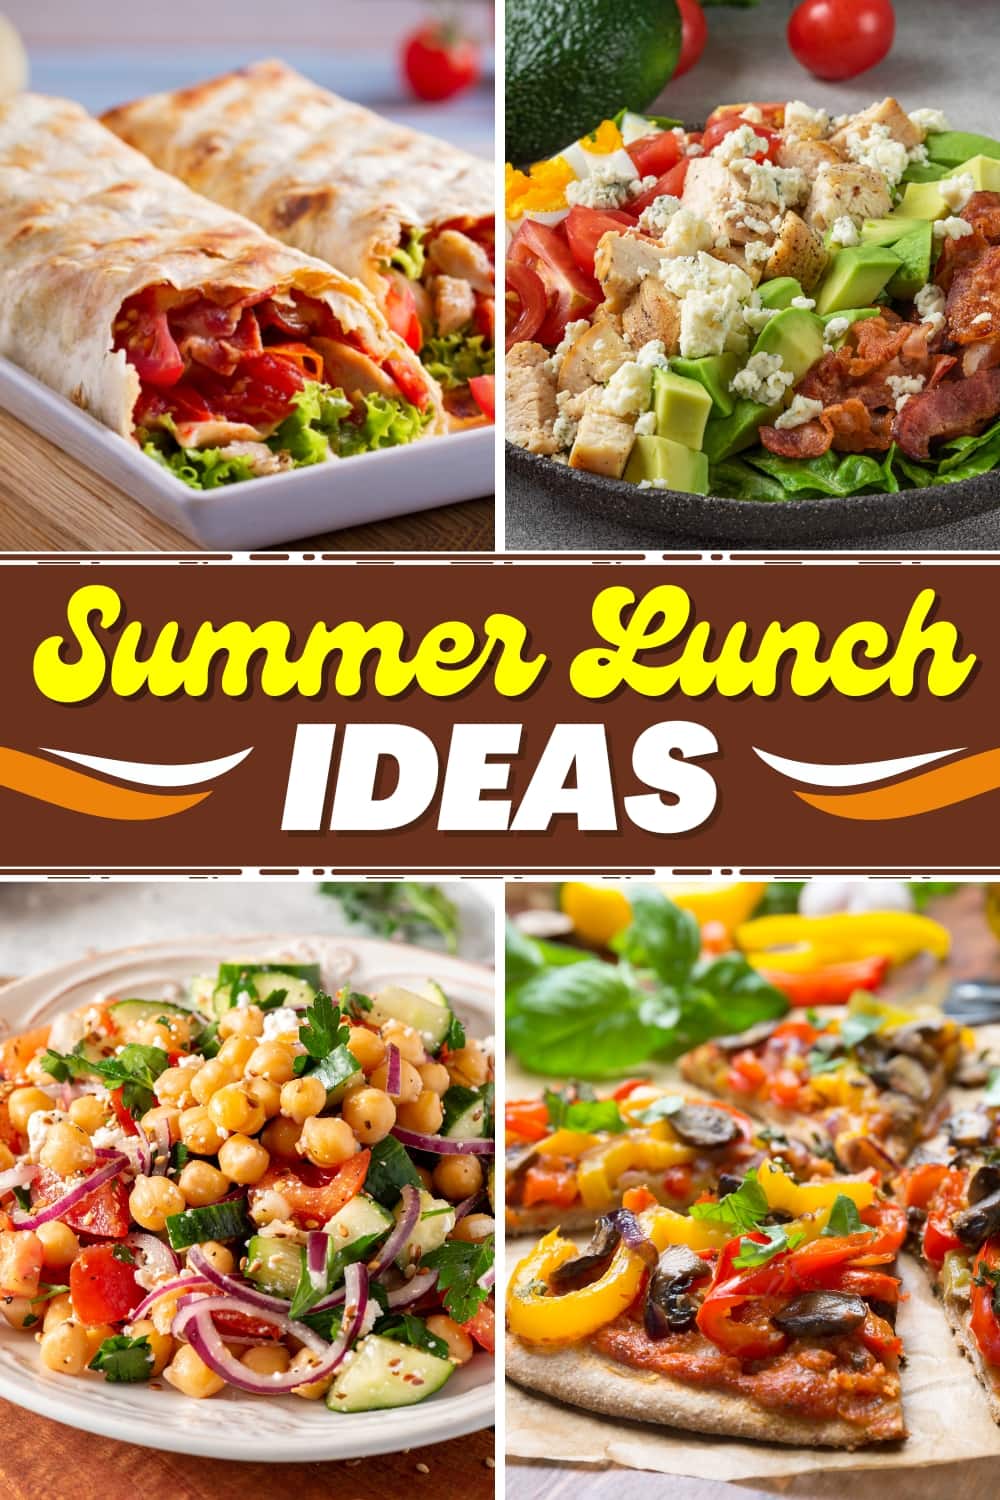 30 Summer Lunch Ideas (+ Easy Recipes) - Insanely Good